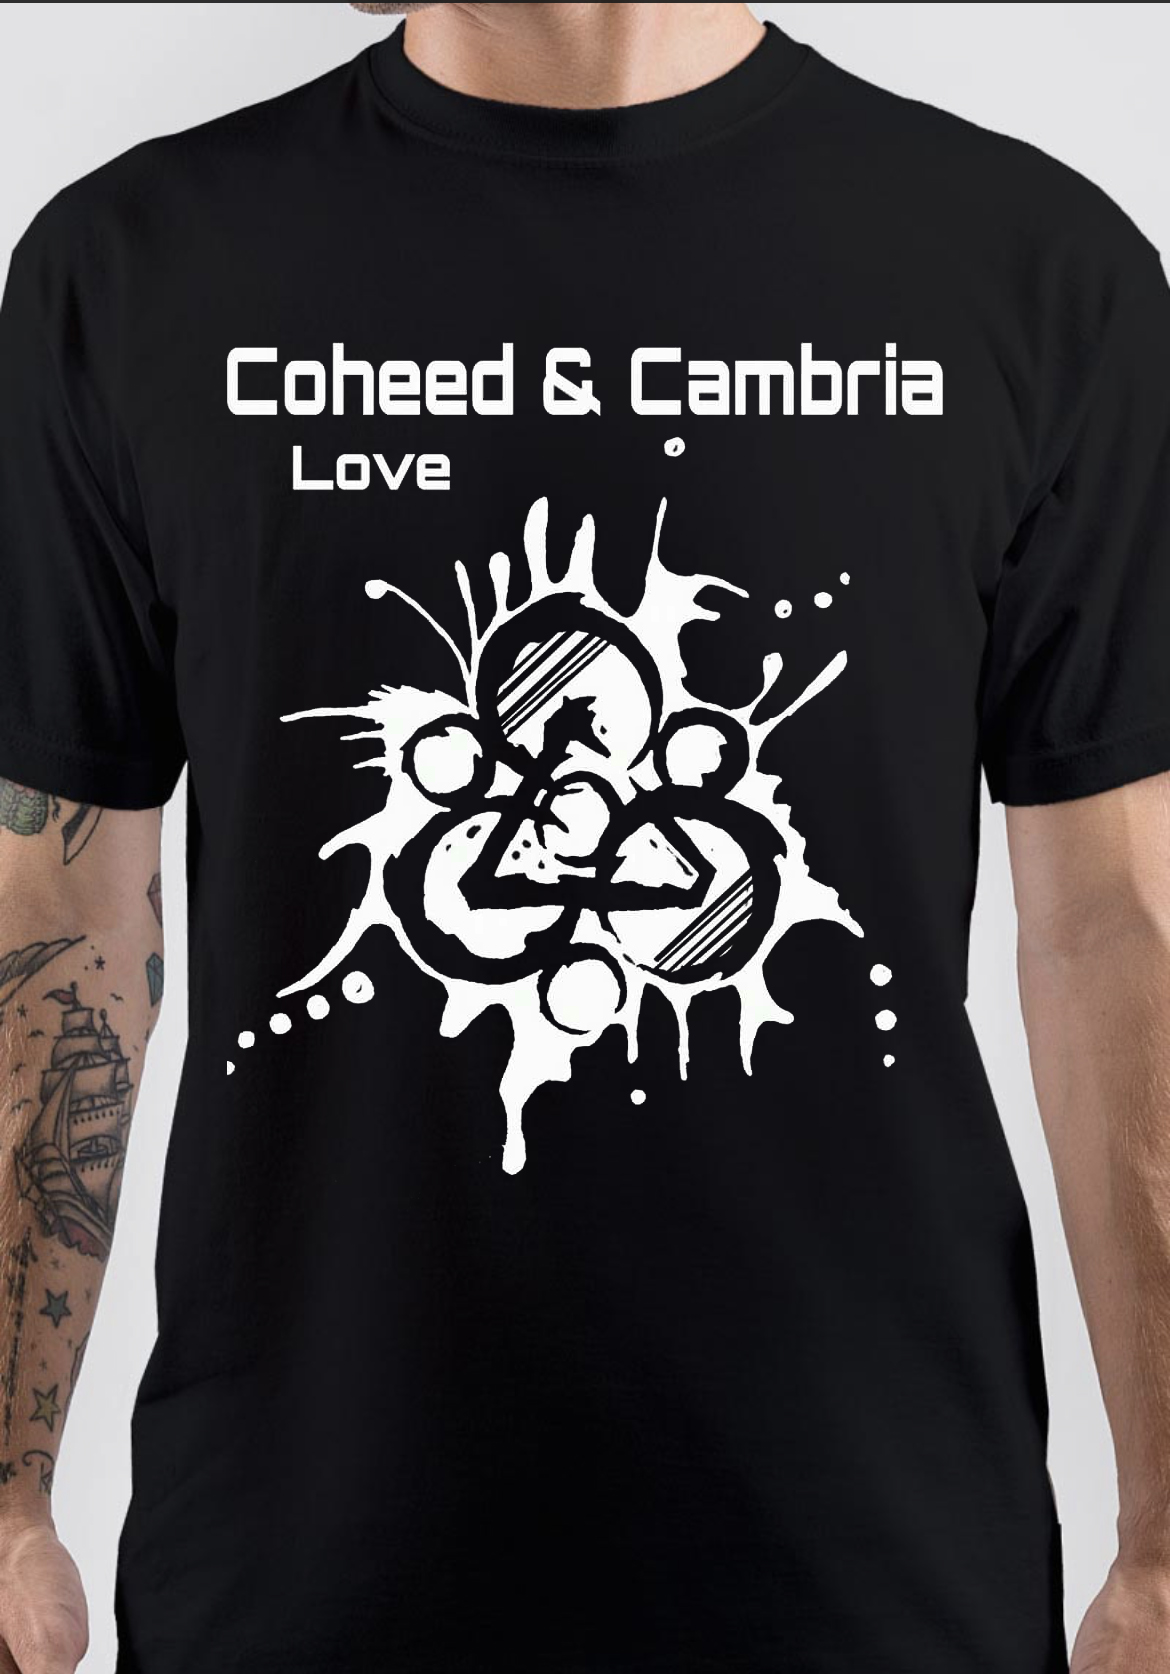 Coheed And Cambria T-Shirt And Merchandise